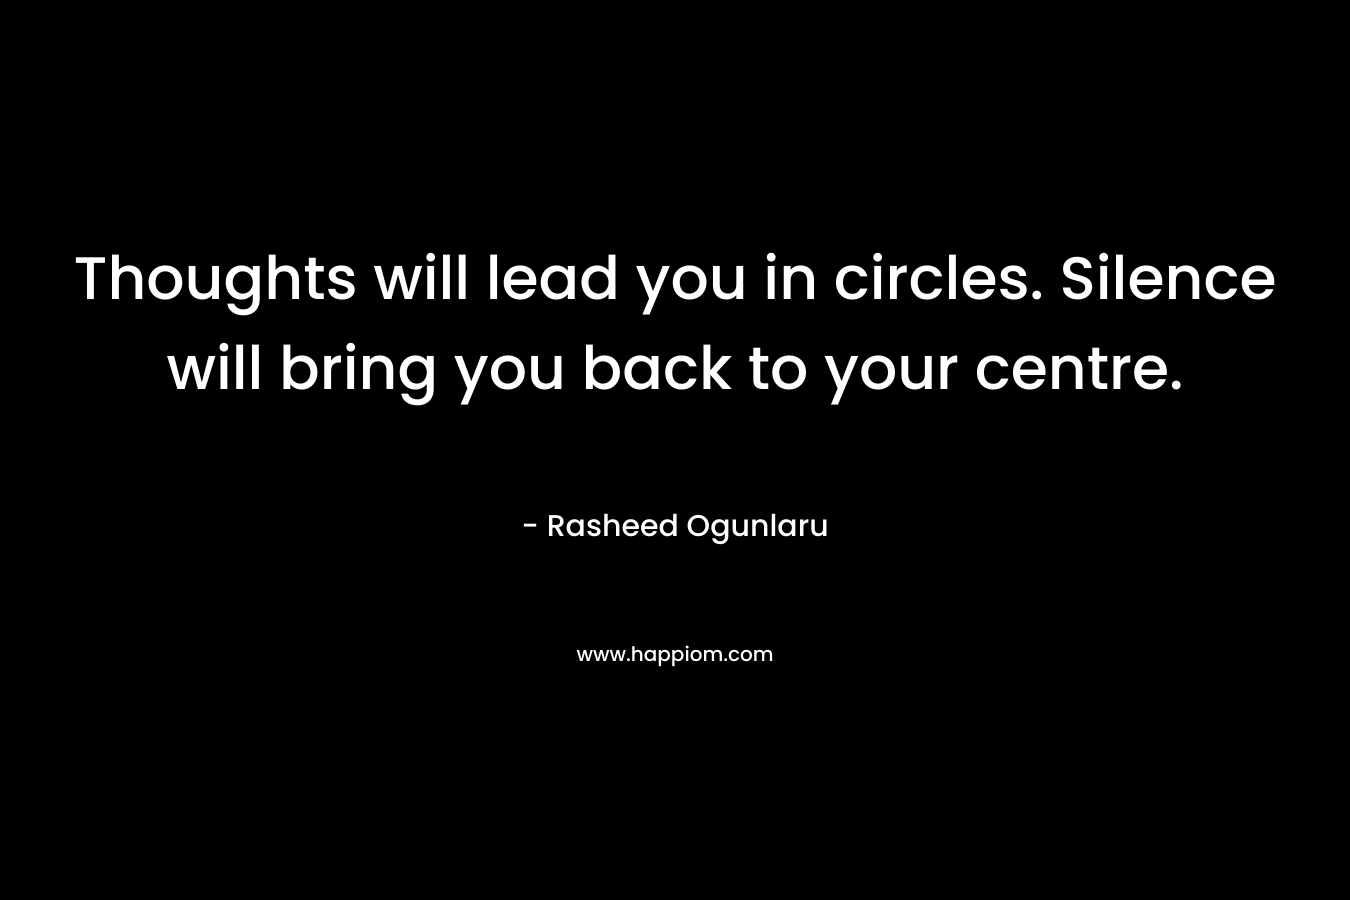 Thoughts will lead you in circles. Silence will bring you back to your centre.